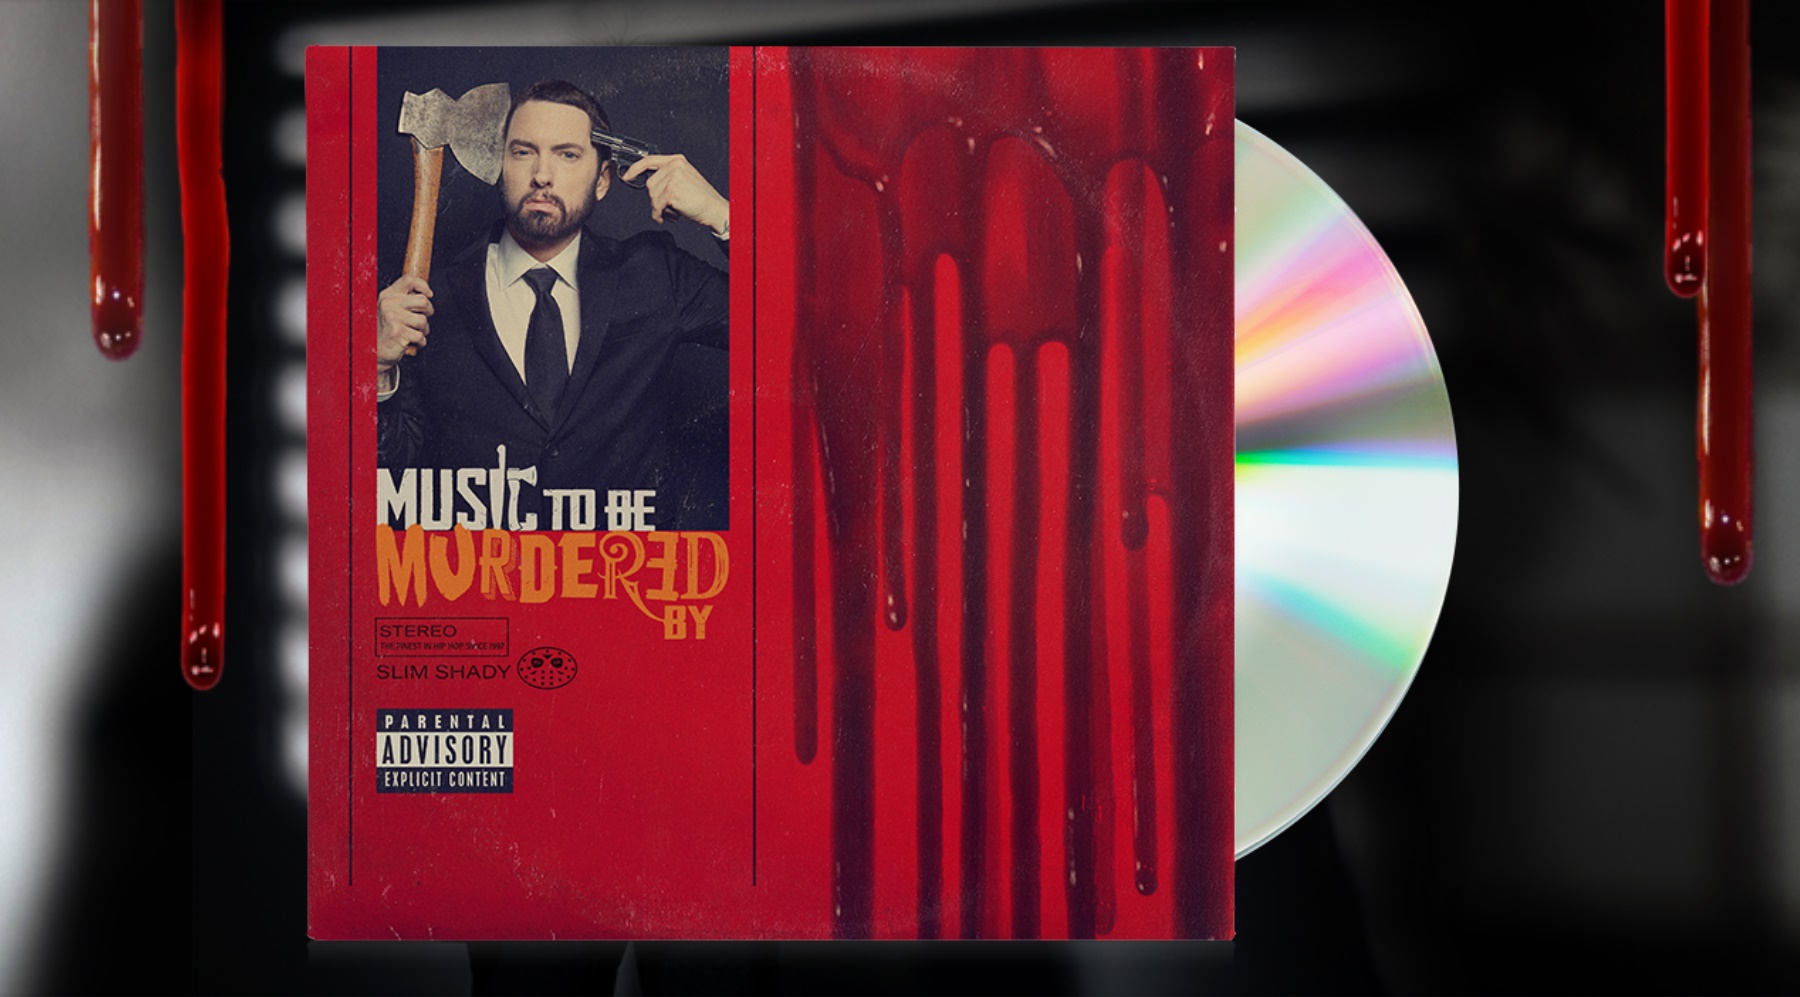 Exclusive Eminem.Pro review of Eminem's “Music To Be Murdered By” Album:  Beware If You Are Still Alive!